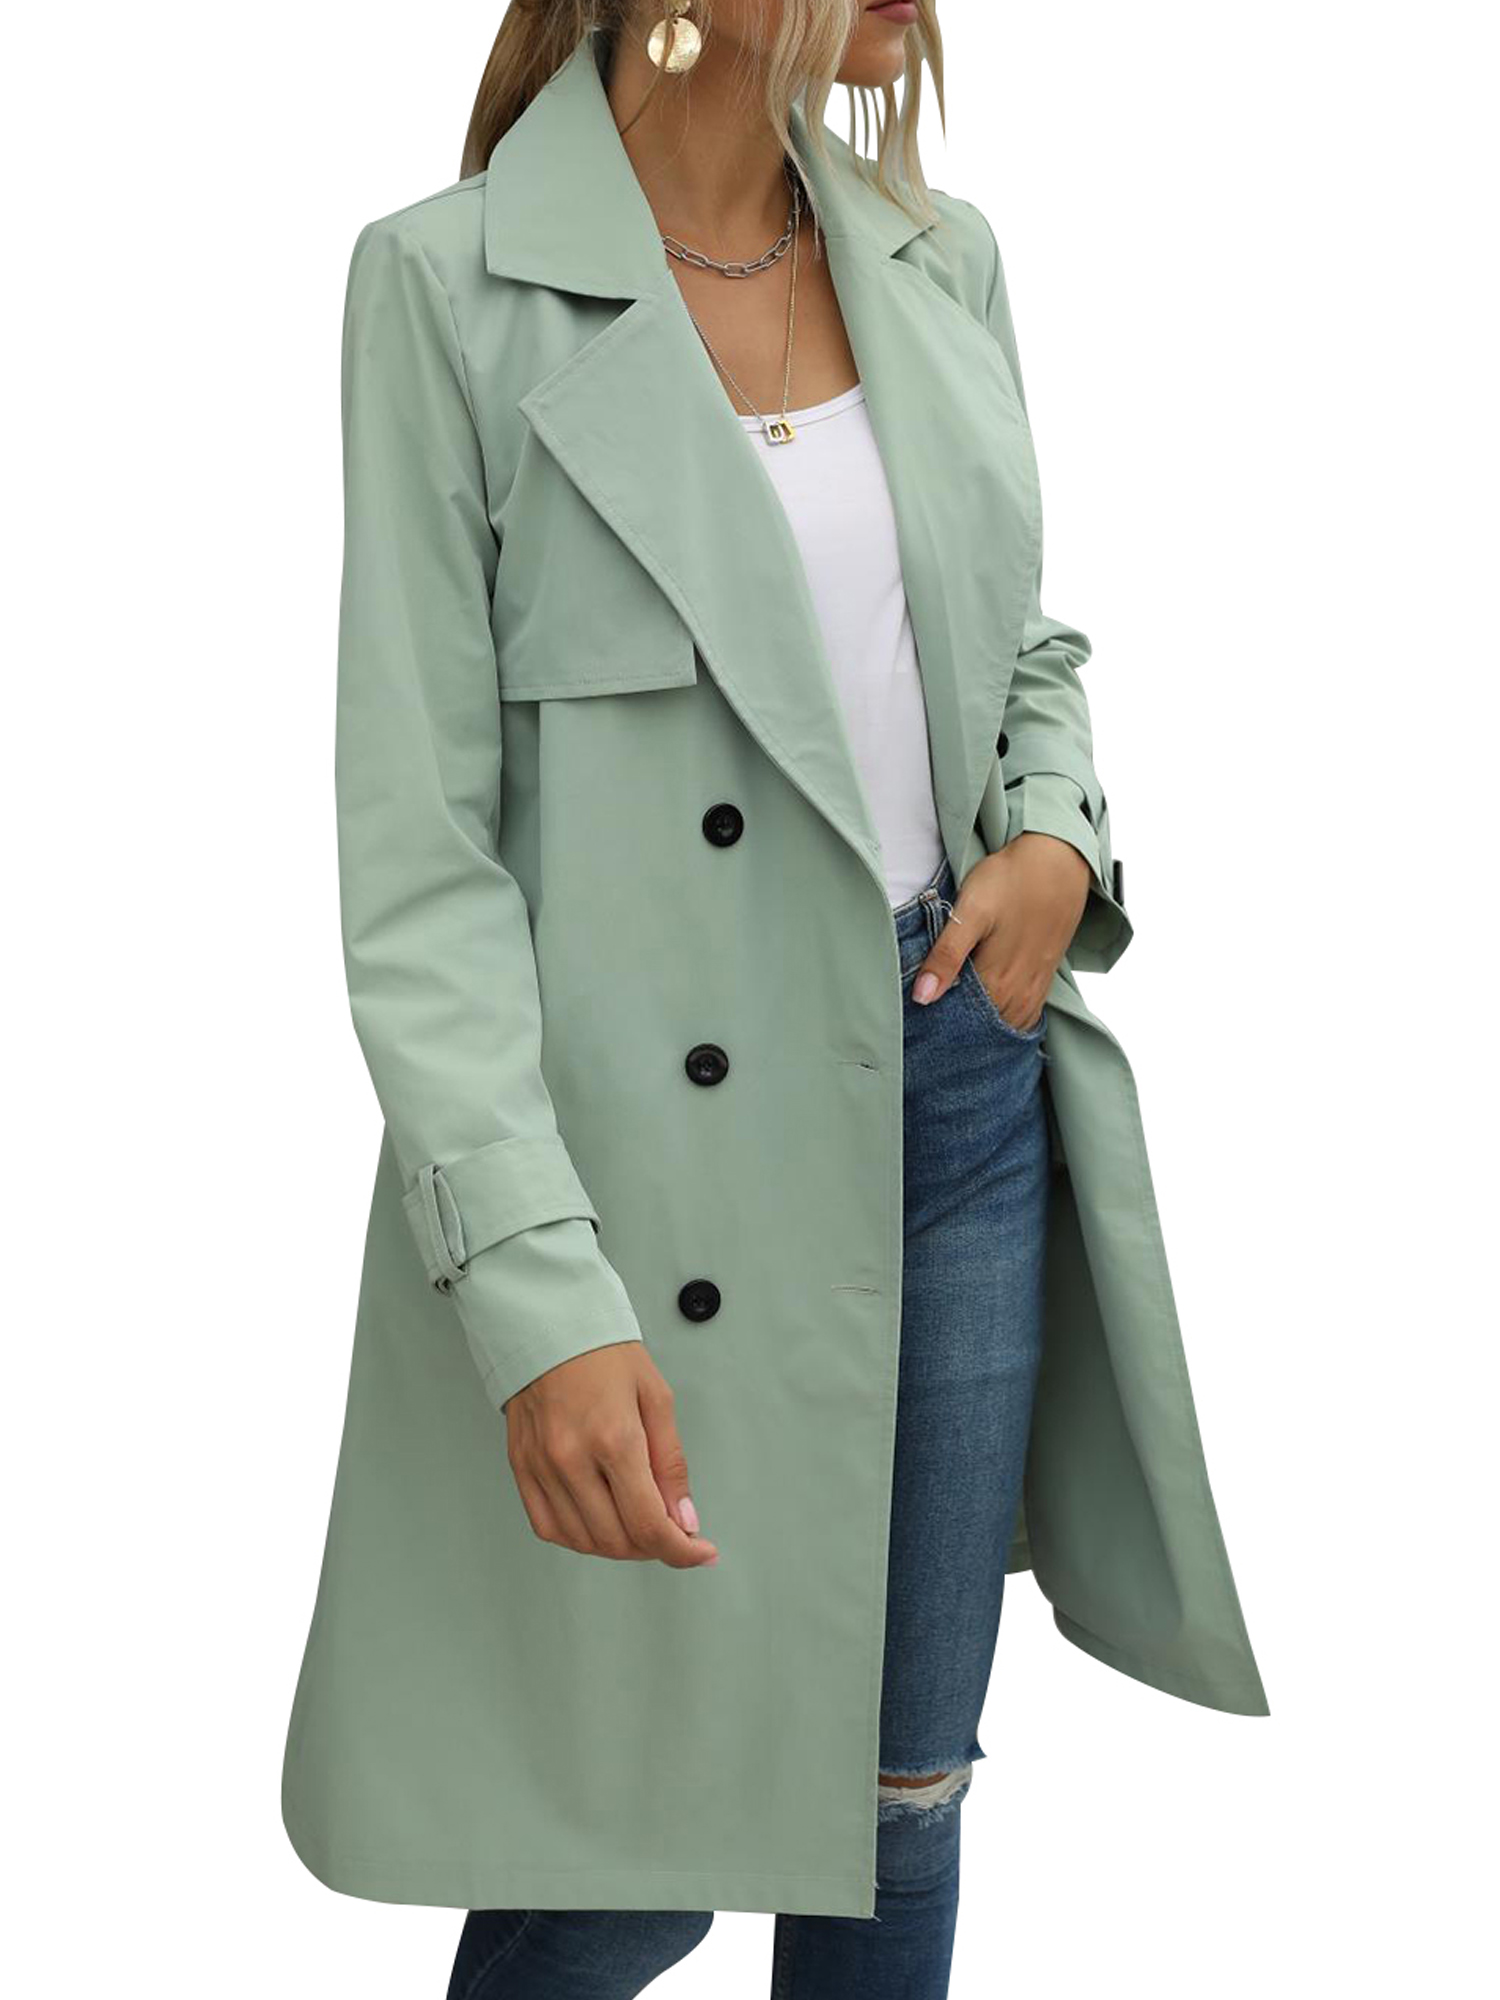 Spring hue Women Jacket Long Sleeve Lapel Double Breasted Belted Trench Coat - image 3 of 6